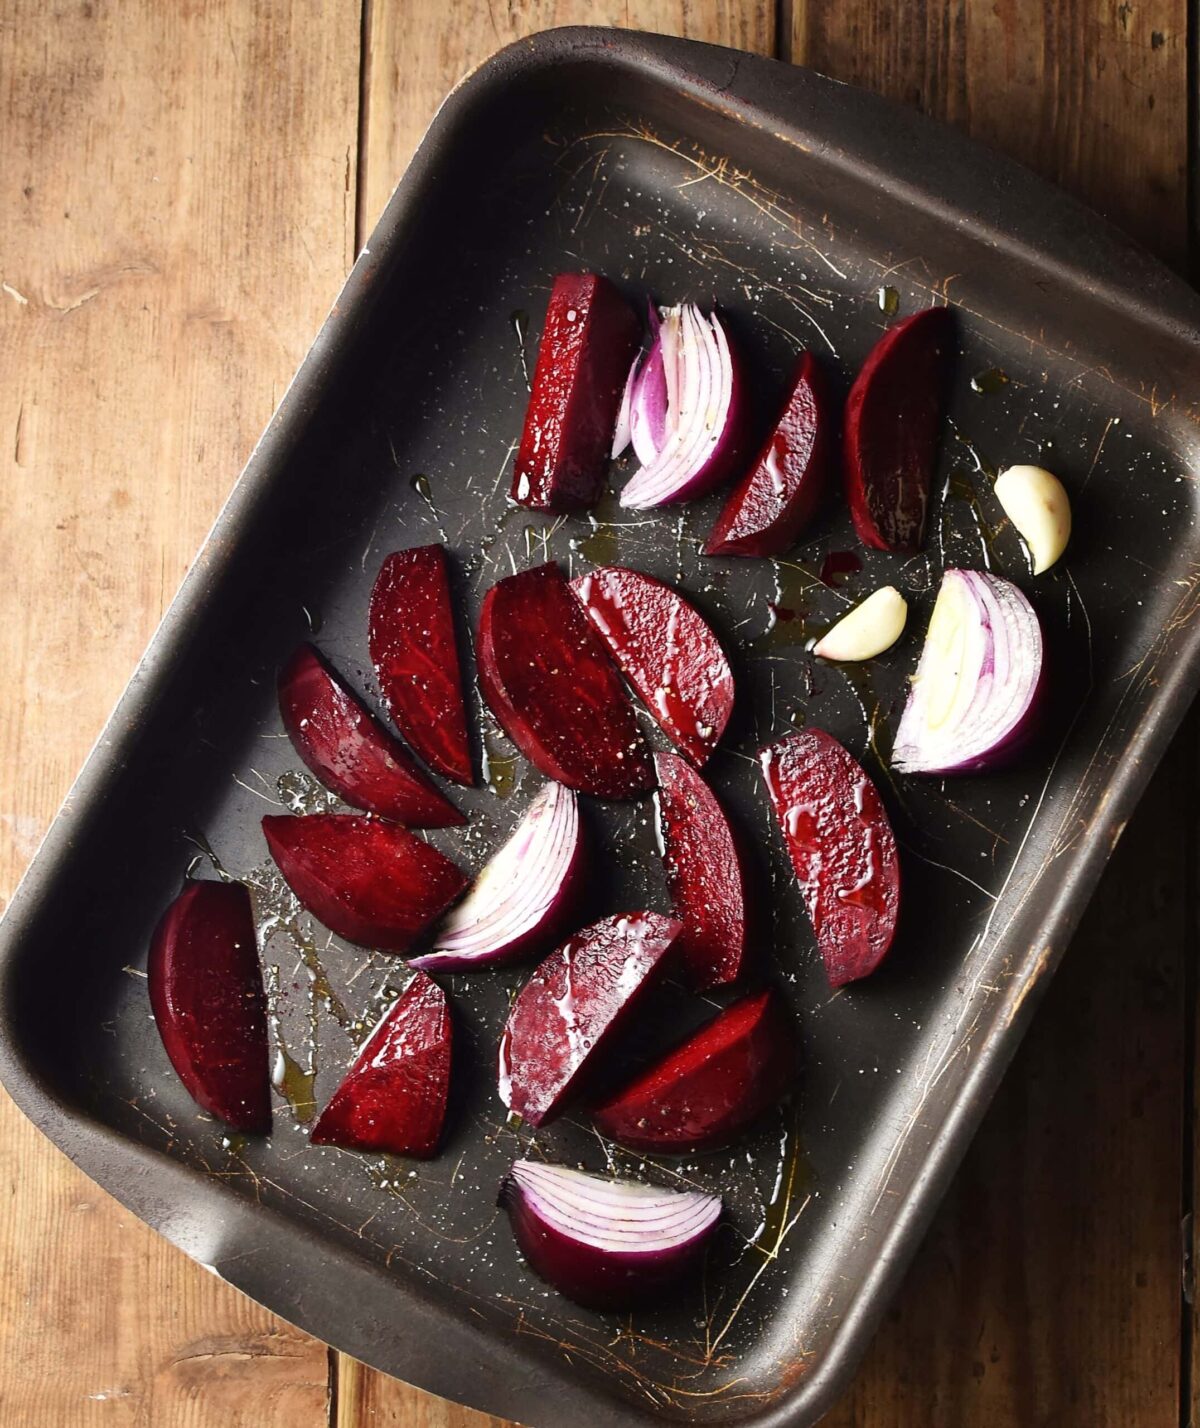 Beet wedges and red onion wedges with 2 garlic cloves in tray.